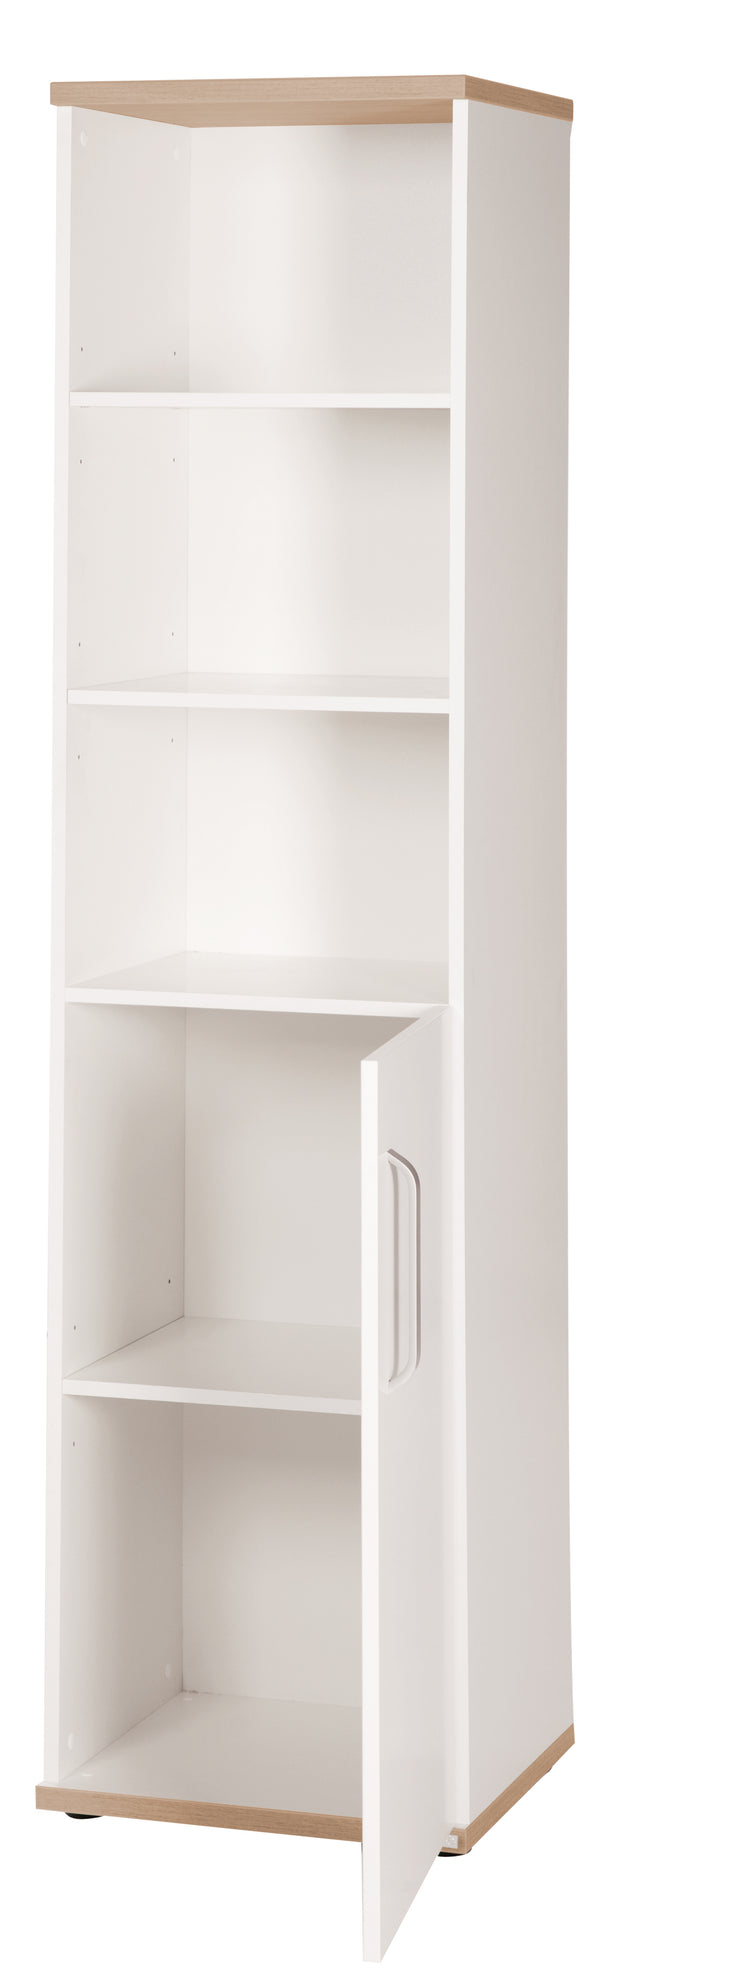 Stand shelf 'Pia' with body & fronts white, décor 'San Remo oak', wooden shelf